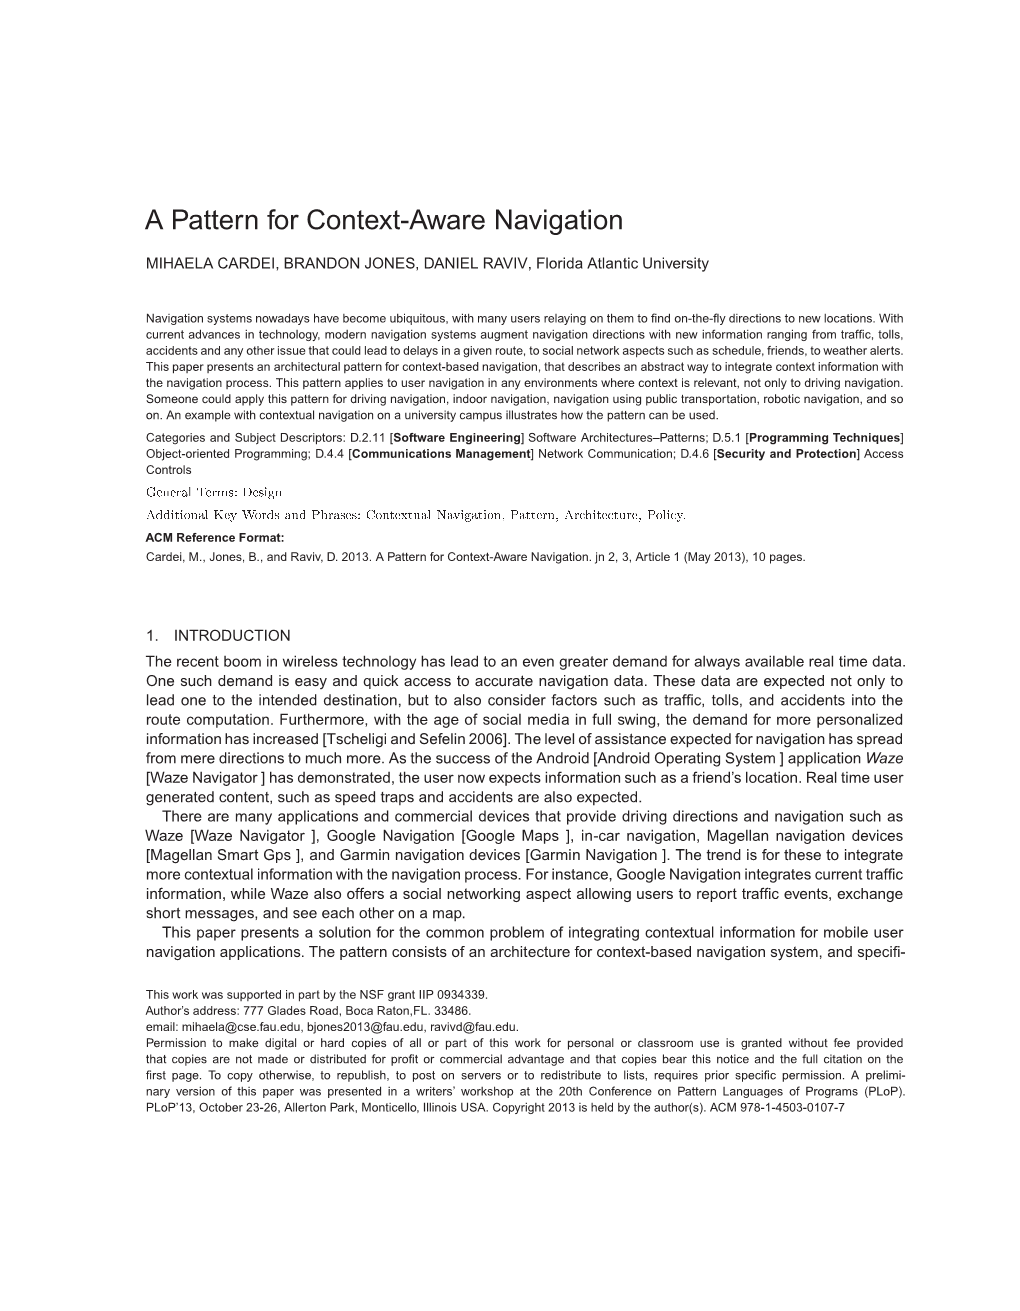 A Pattern for Context-Aware Navigation